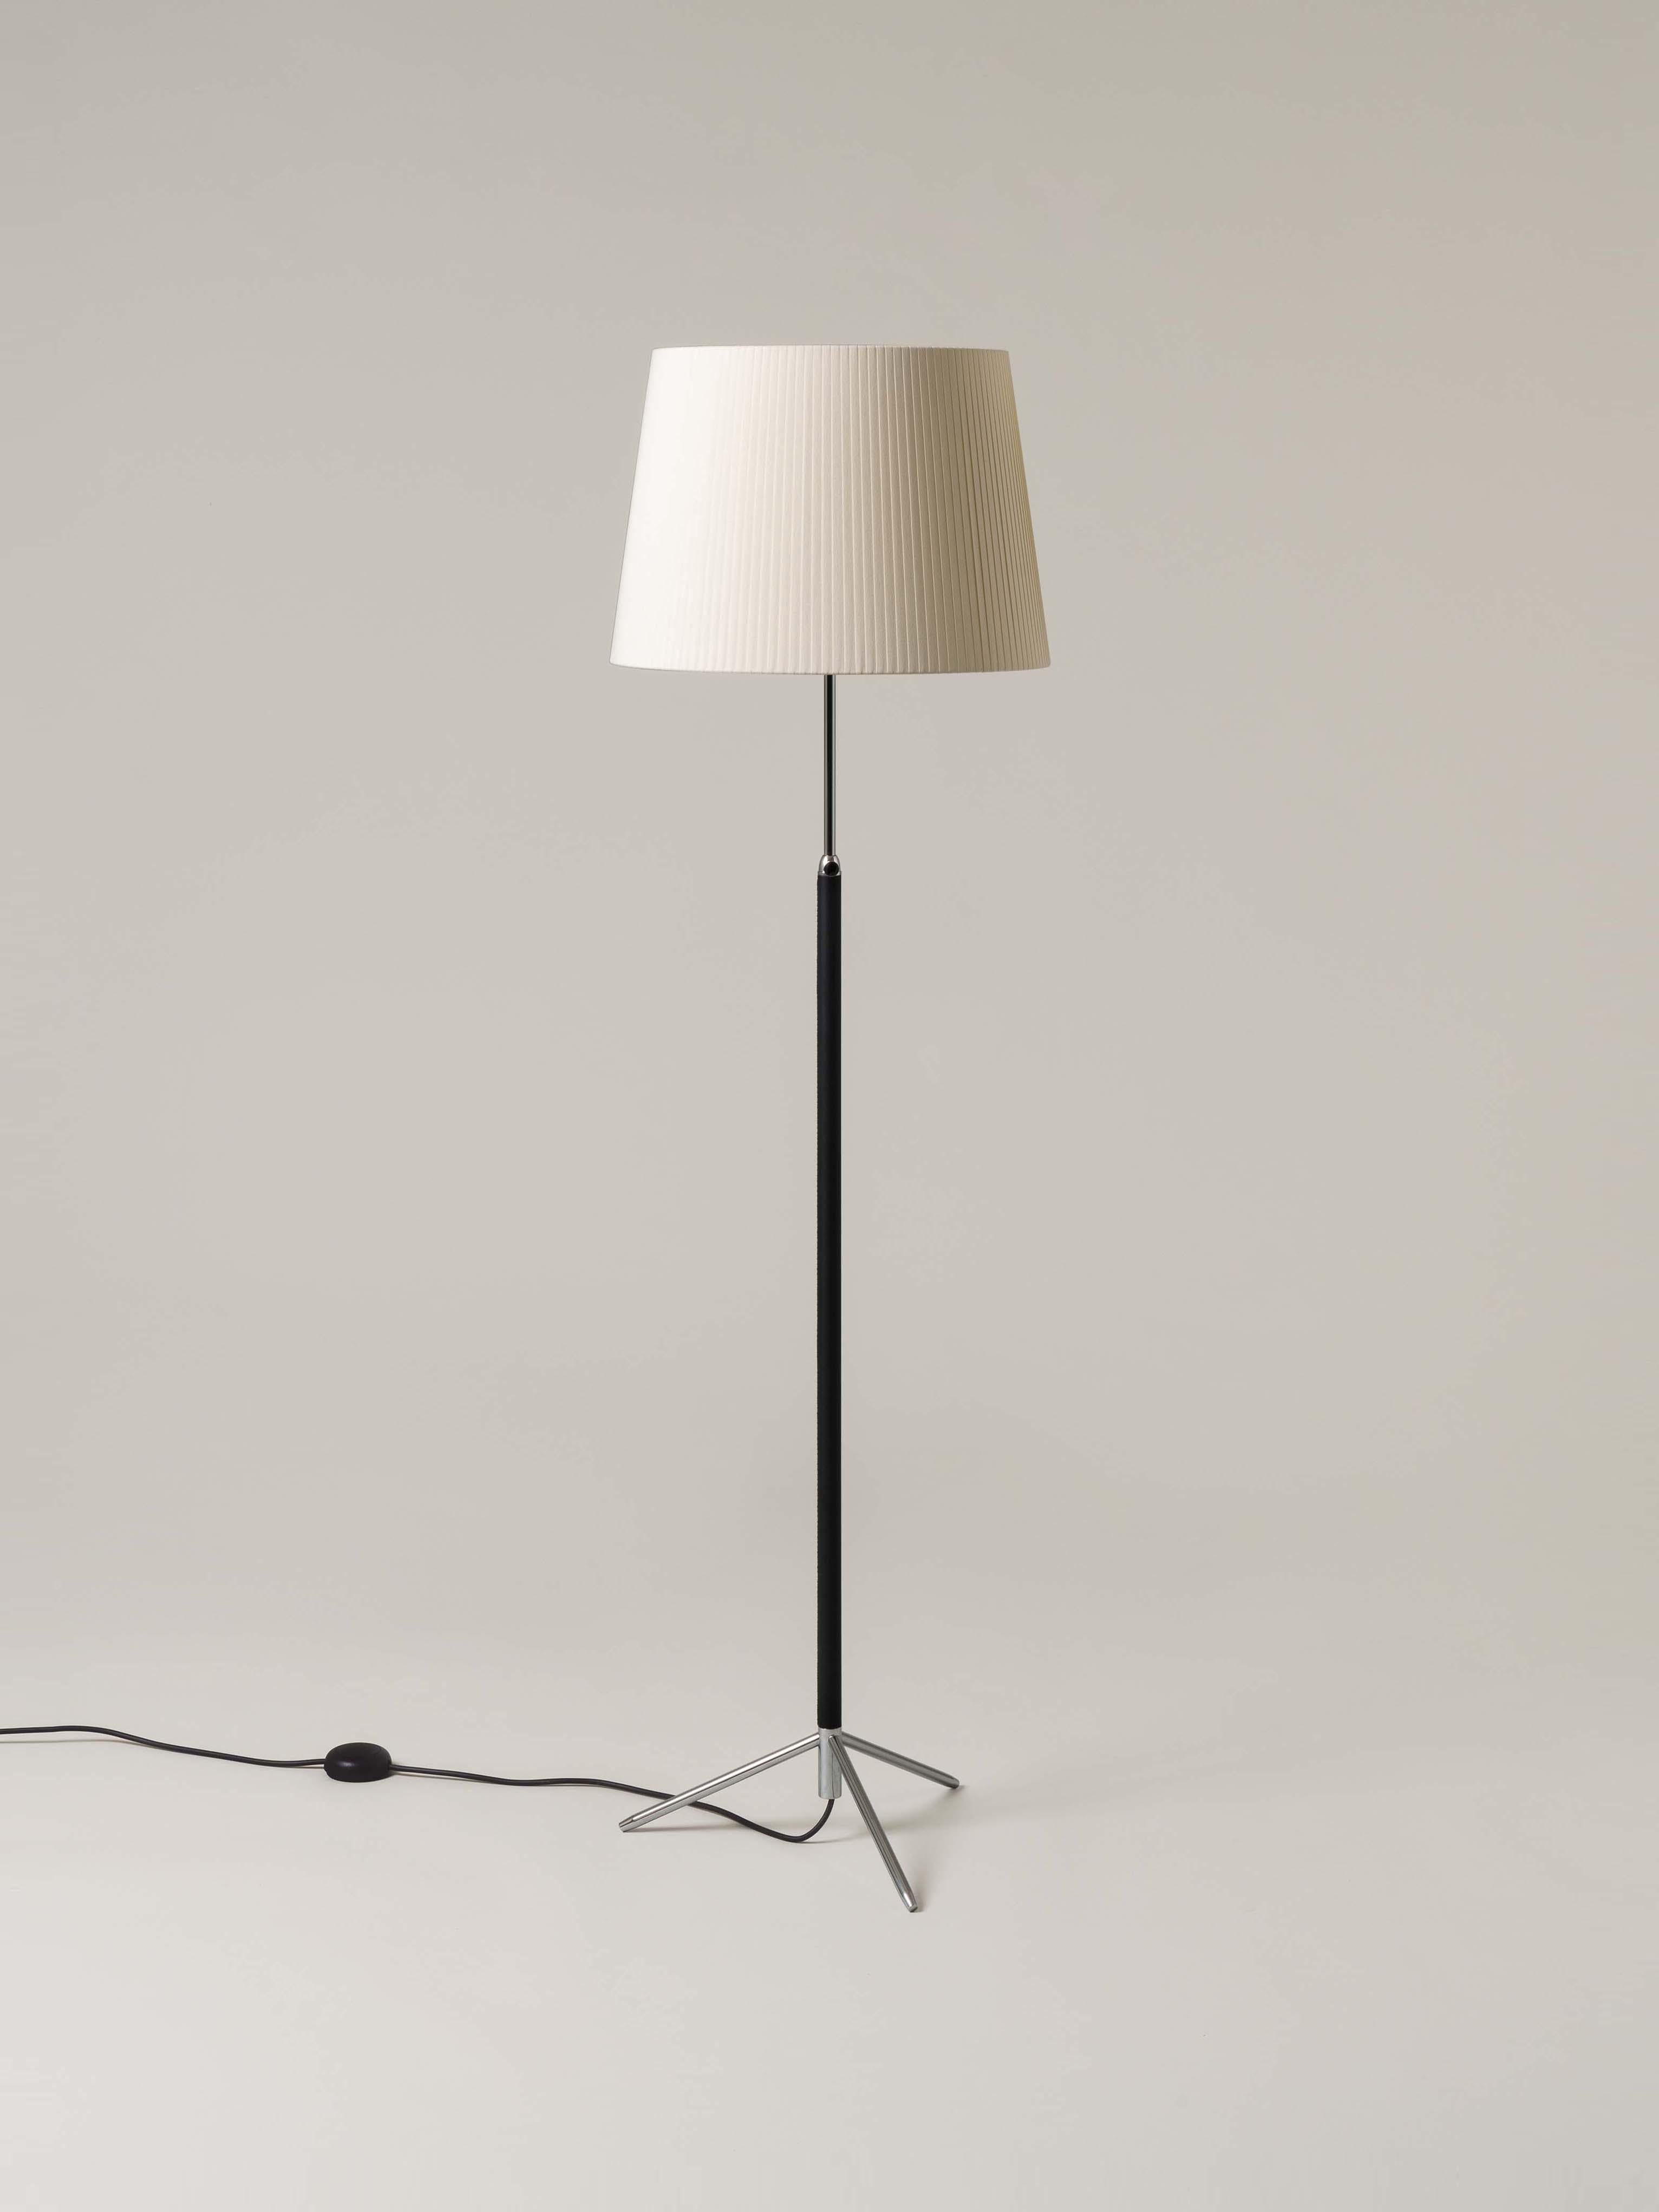 Natural and Chrome Pie de Salón G1 floor lamp by Jaume Sans
Dimensions: D 45 x H 120-160 cm
Materials: Metal, leather, ribbon.
Available in chrome-plated or polished brass structure.
Available in other shade colors and sizes.

This slender